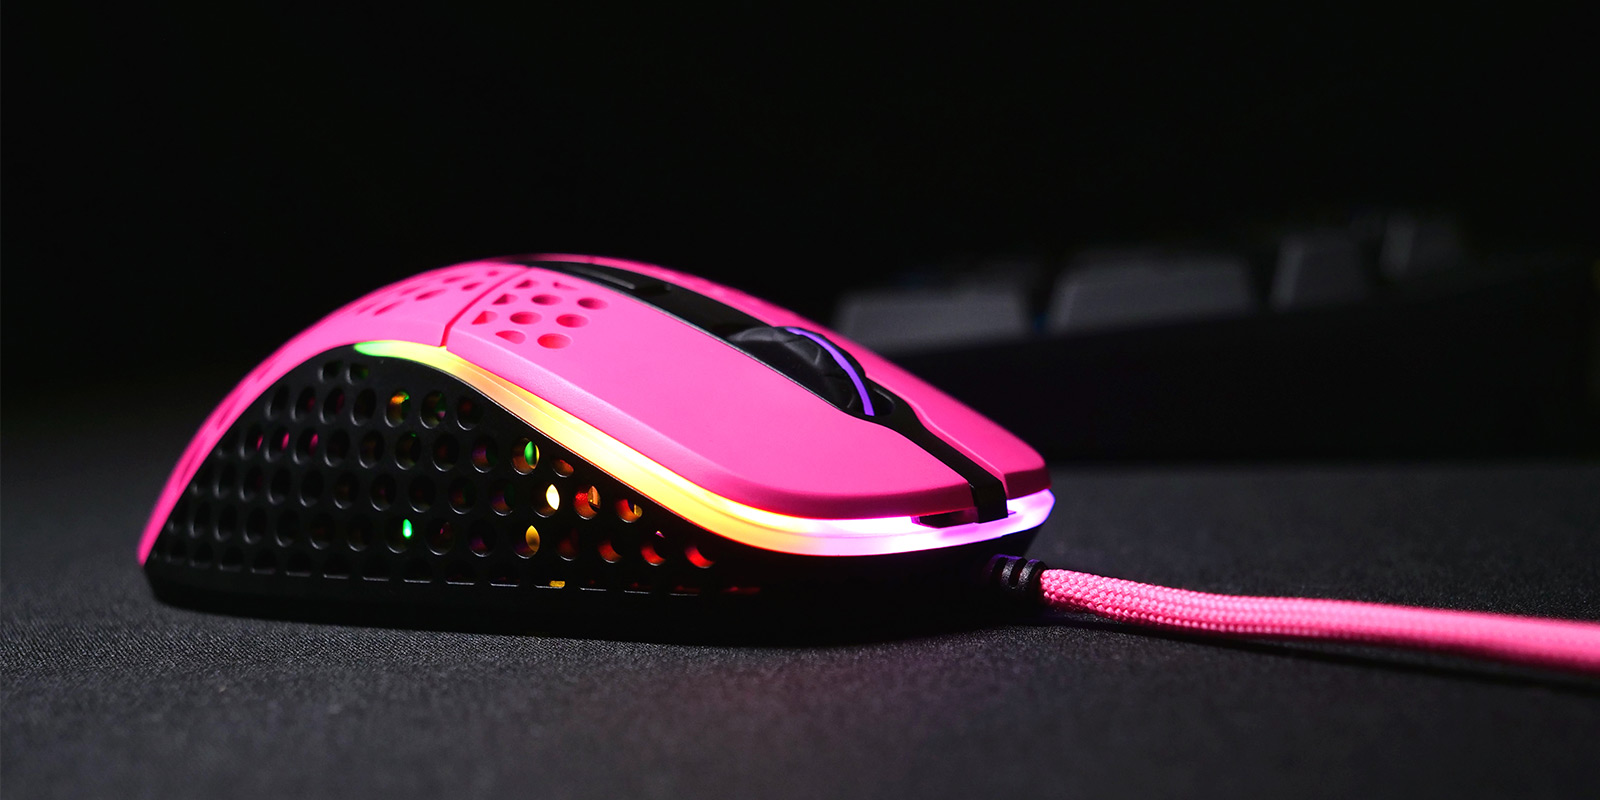 m4-pink - Built On Experience －Xtrfy Japan